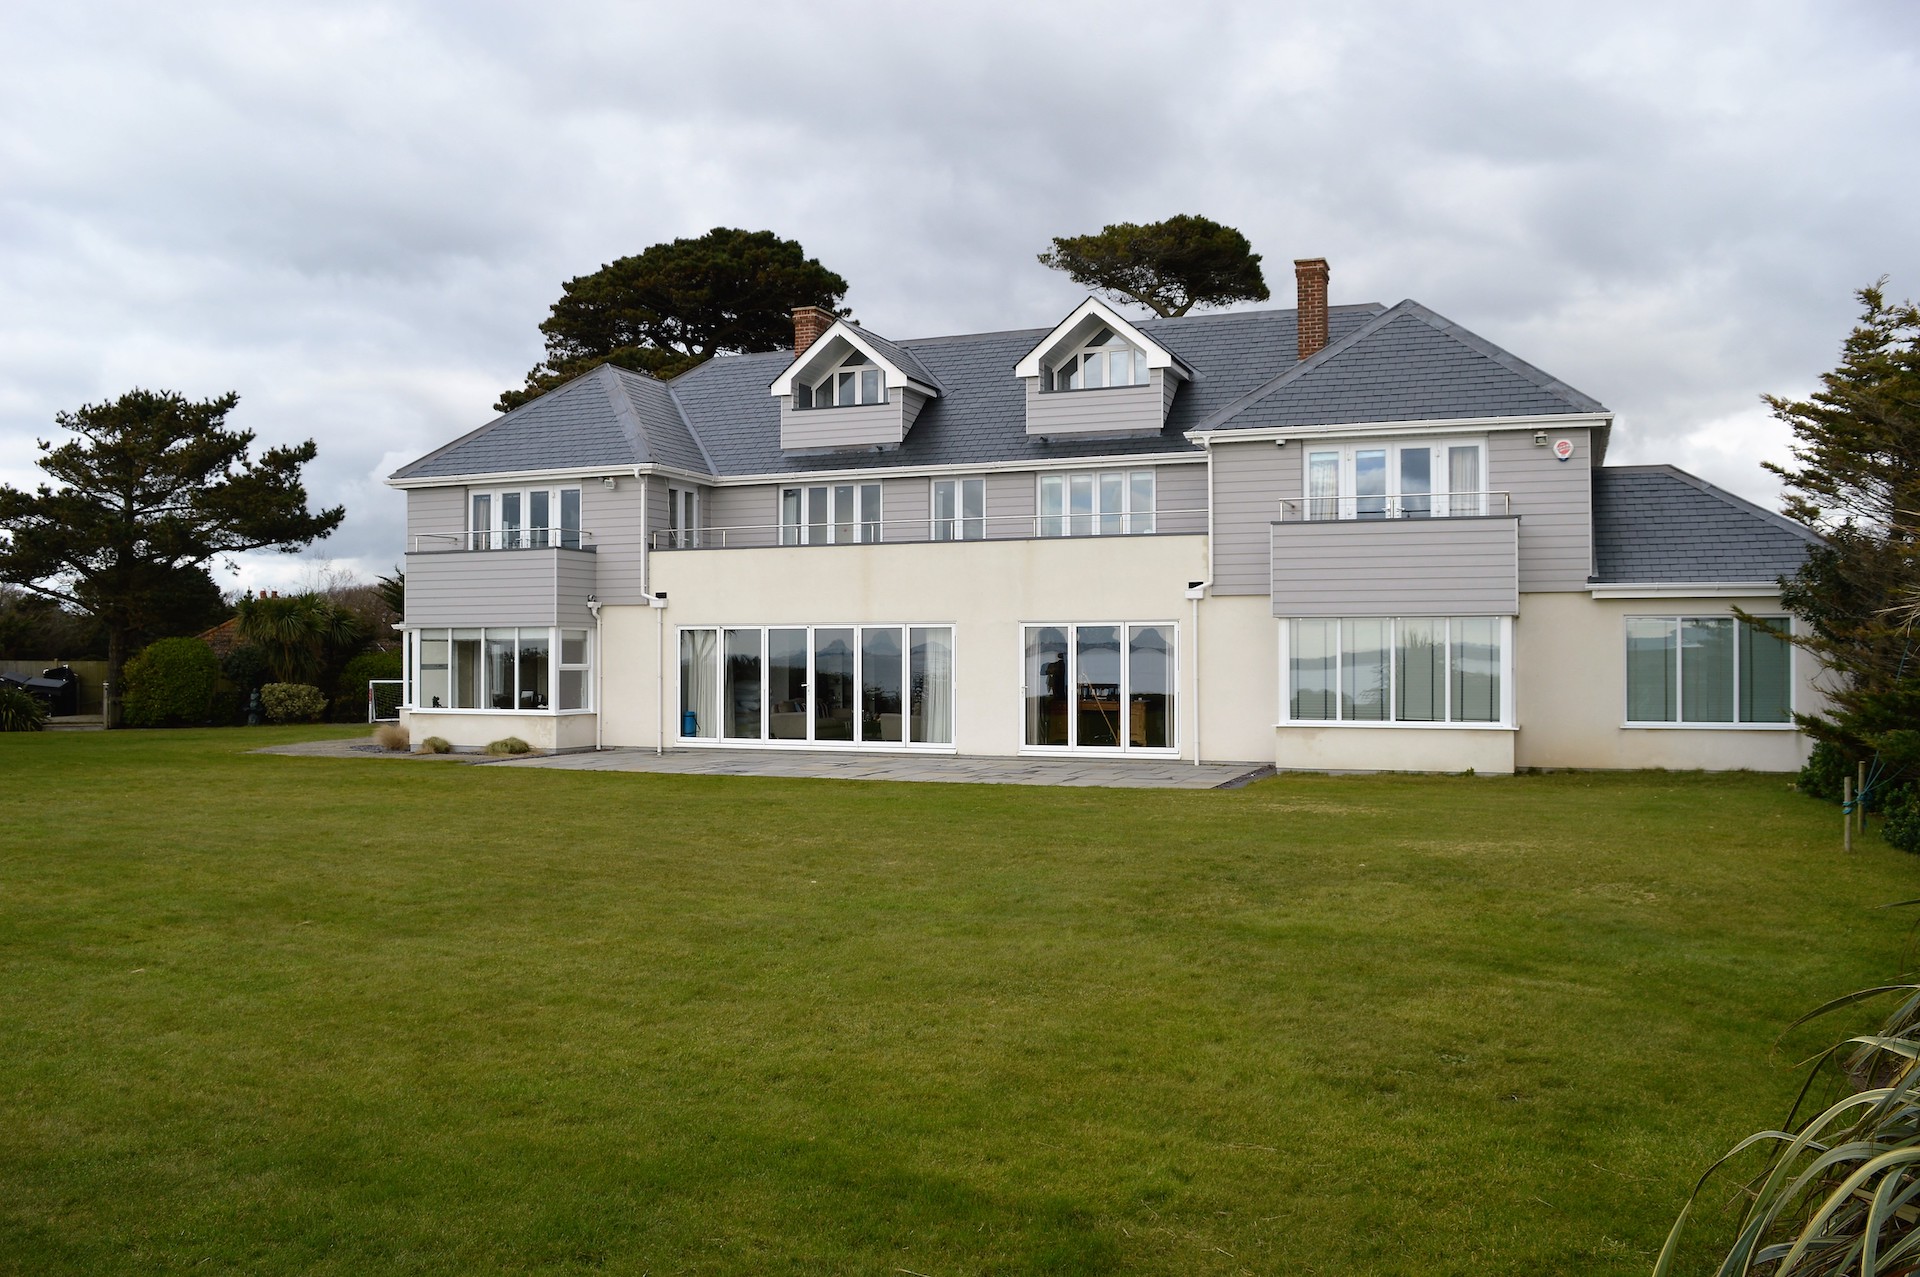 large detached property with Merayo slate roofing